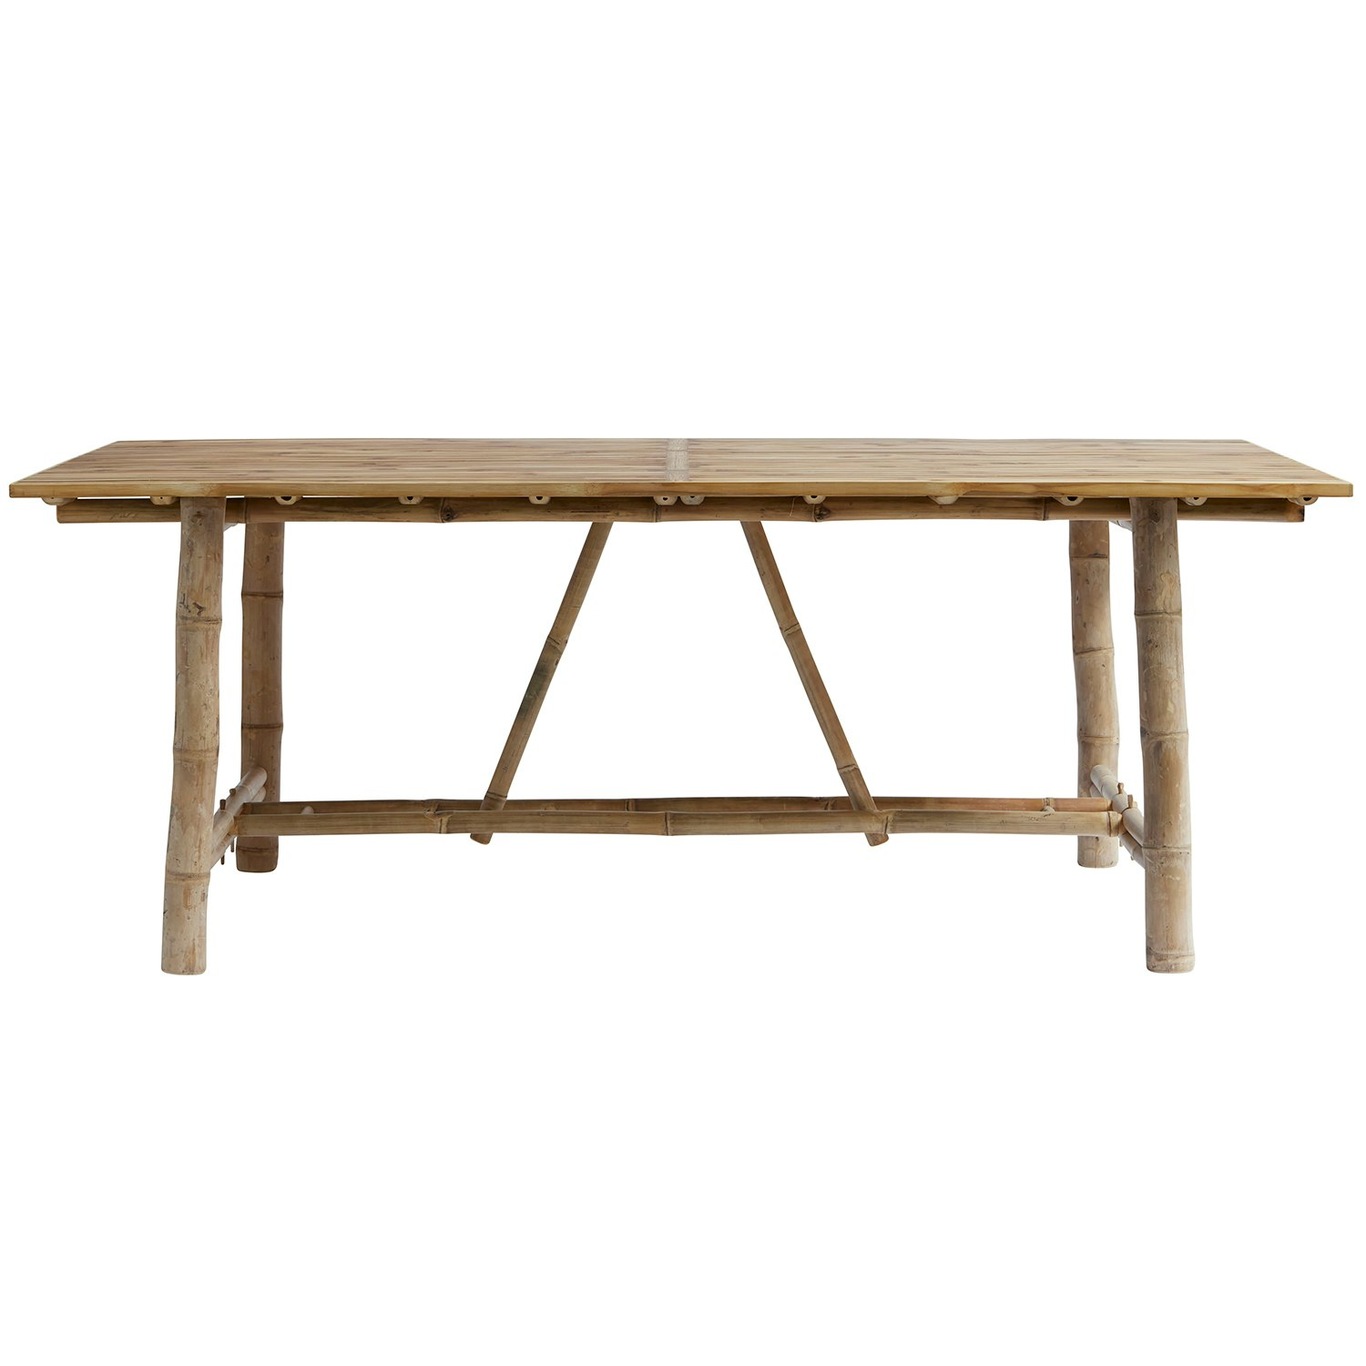 Dining Table Bamboo 80x200 cm, Nature